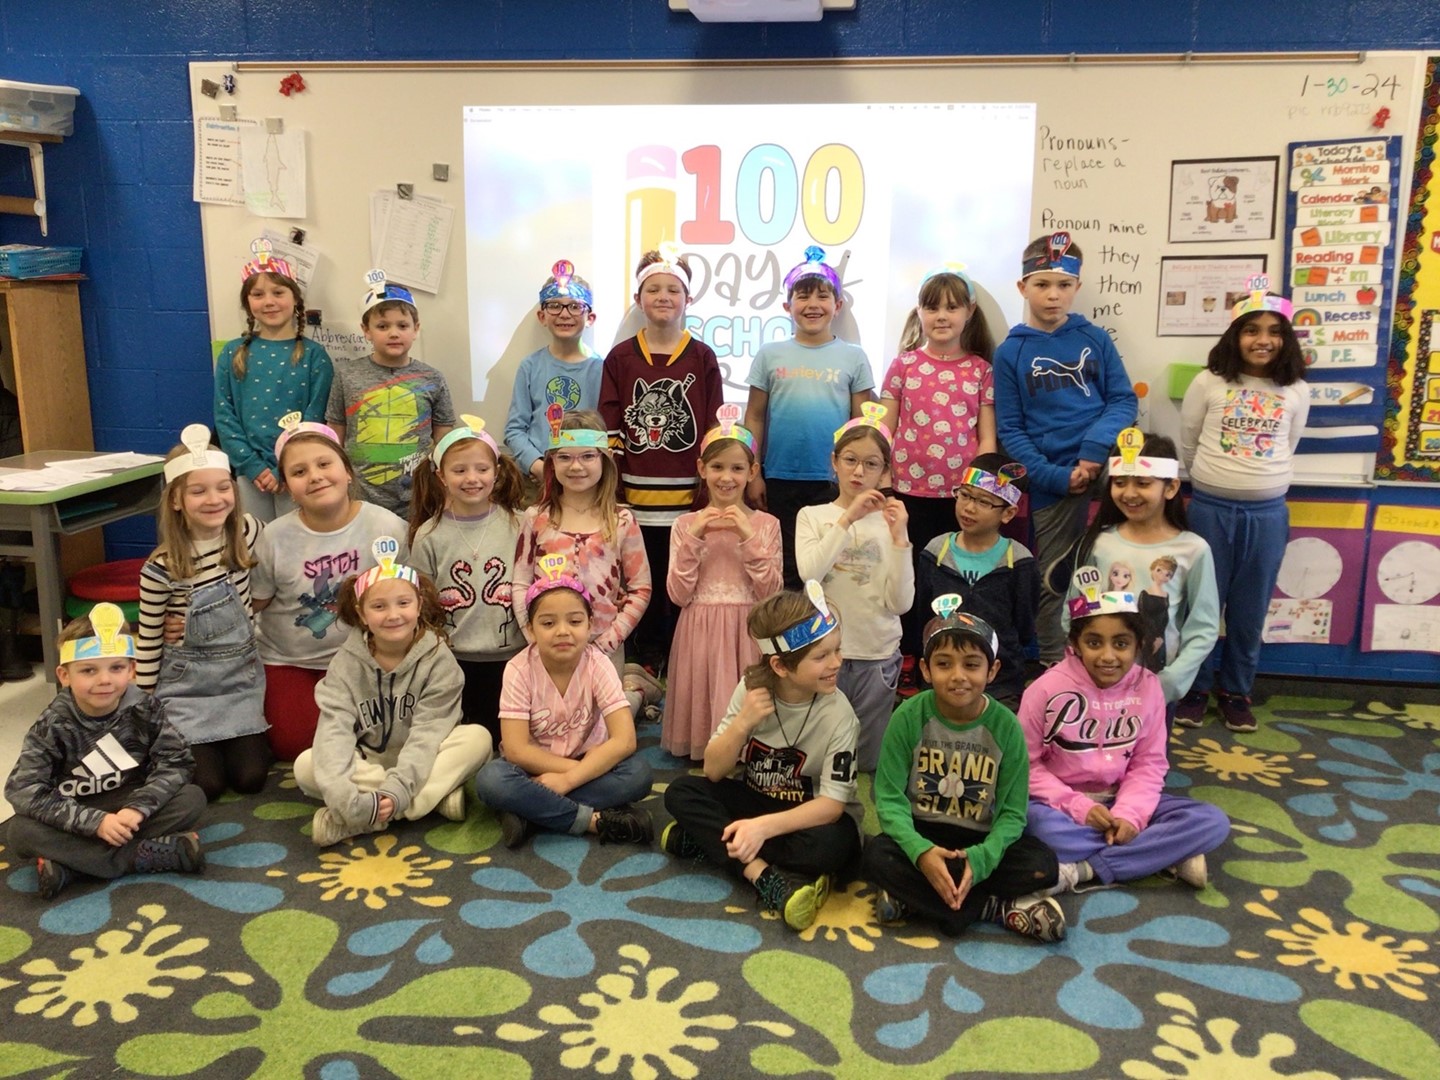 Students posing on the 100th day of school.